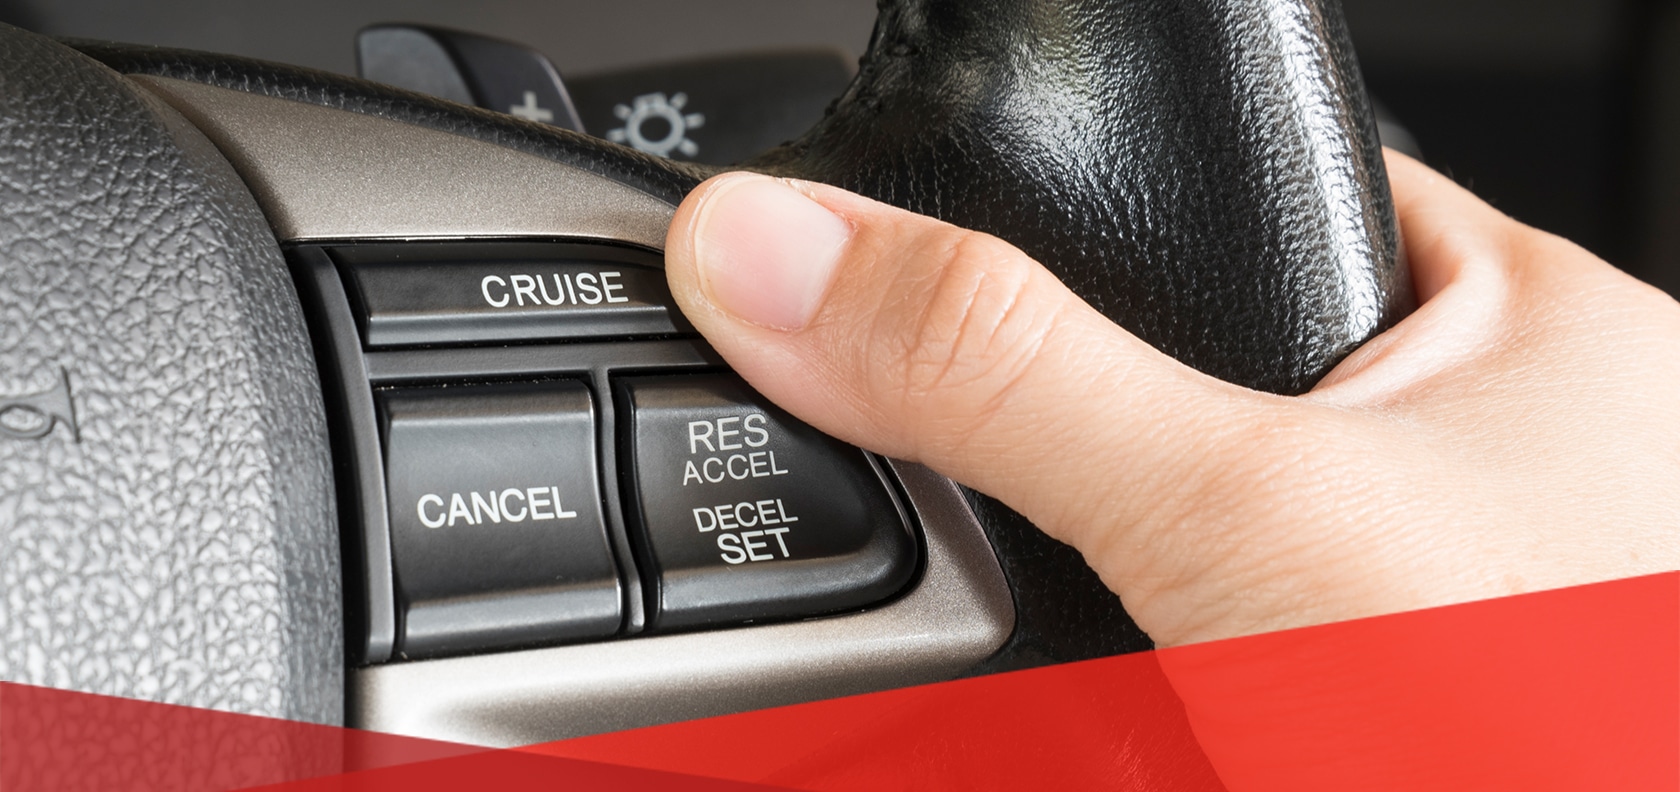 How Does the Cruise Control in Cars Work? MAPFRE Insurance